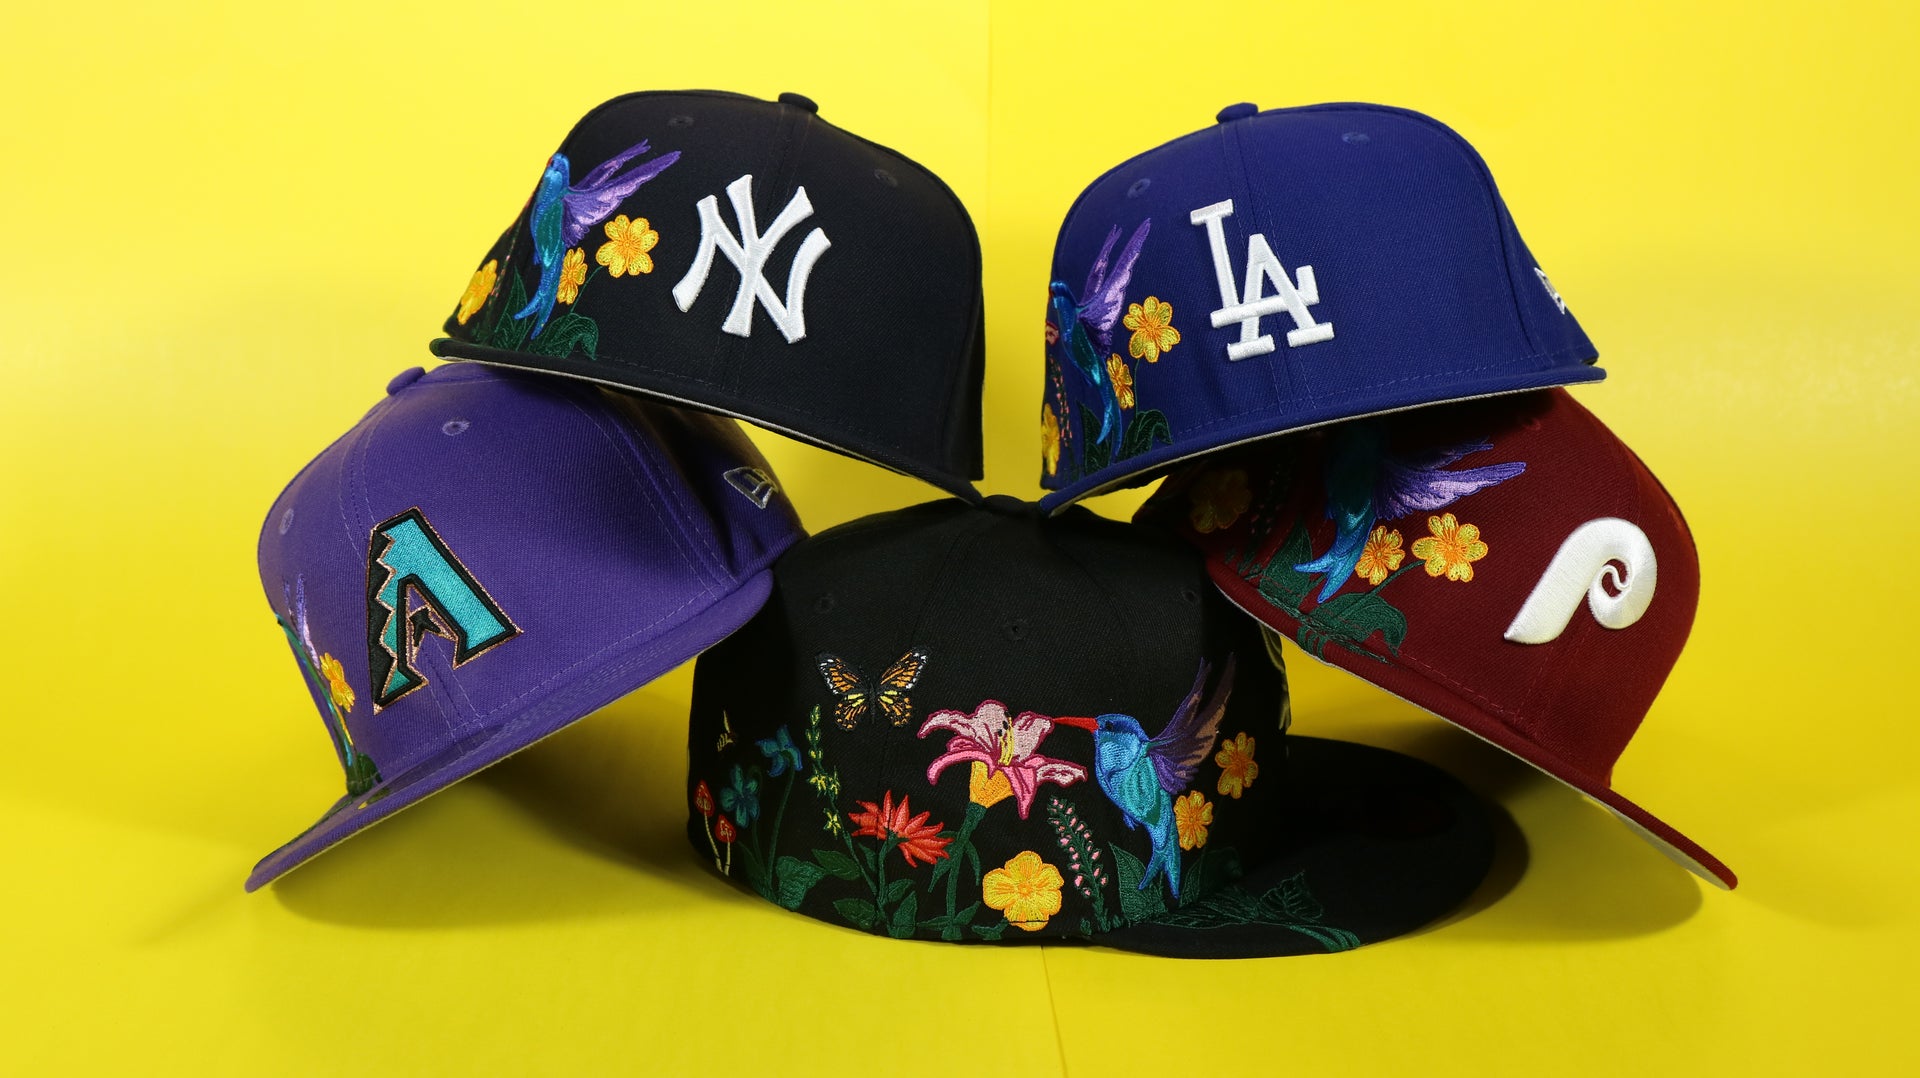 59Fifty Bloom Embroidered MLB Fitted Caps | VIntage MLB Spring Bloom Embroidered 5950 Caps | Fitted Custom Embroidered Bloom MLB 59Fifty Caps